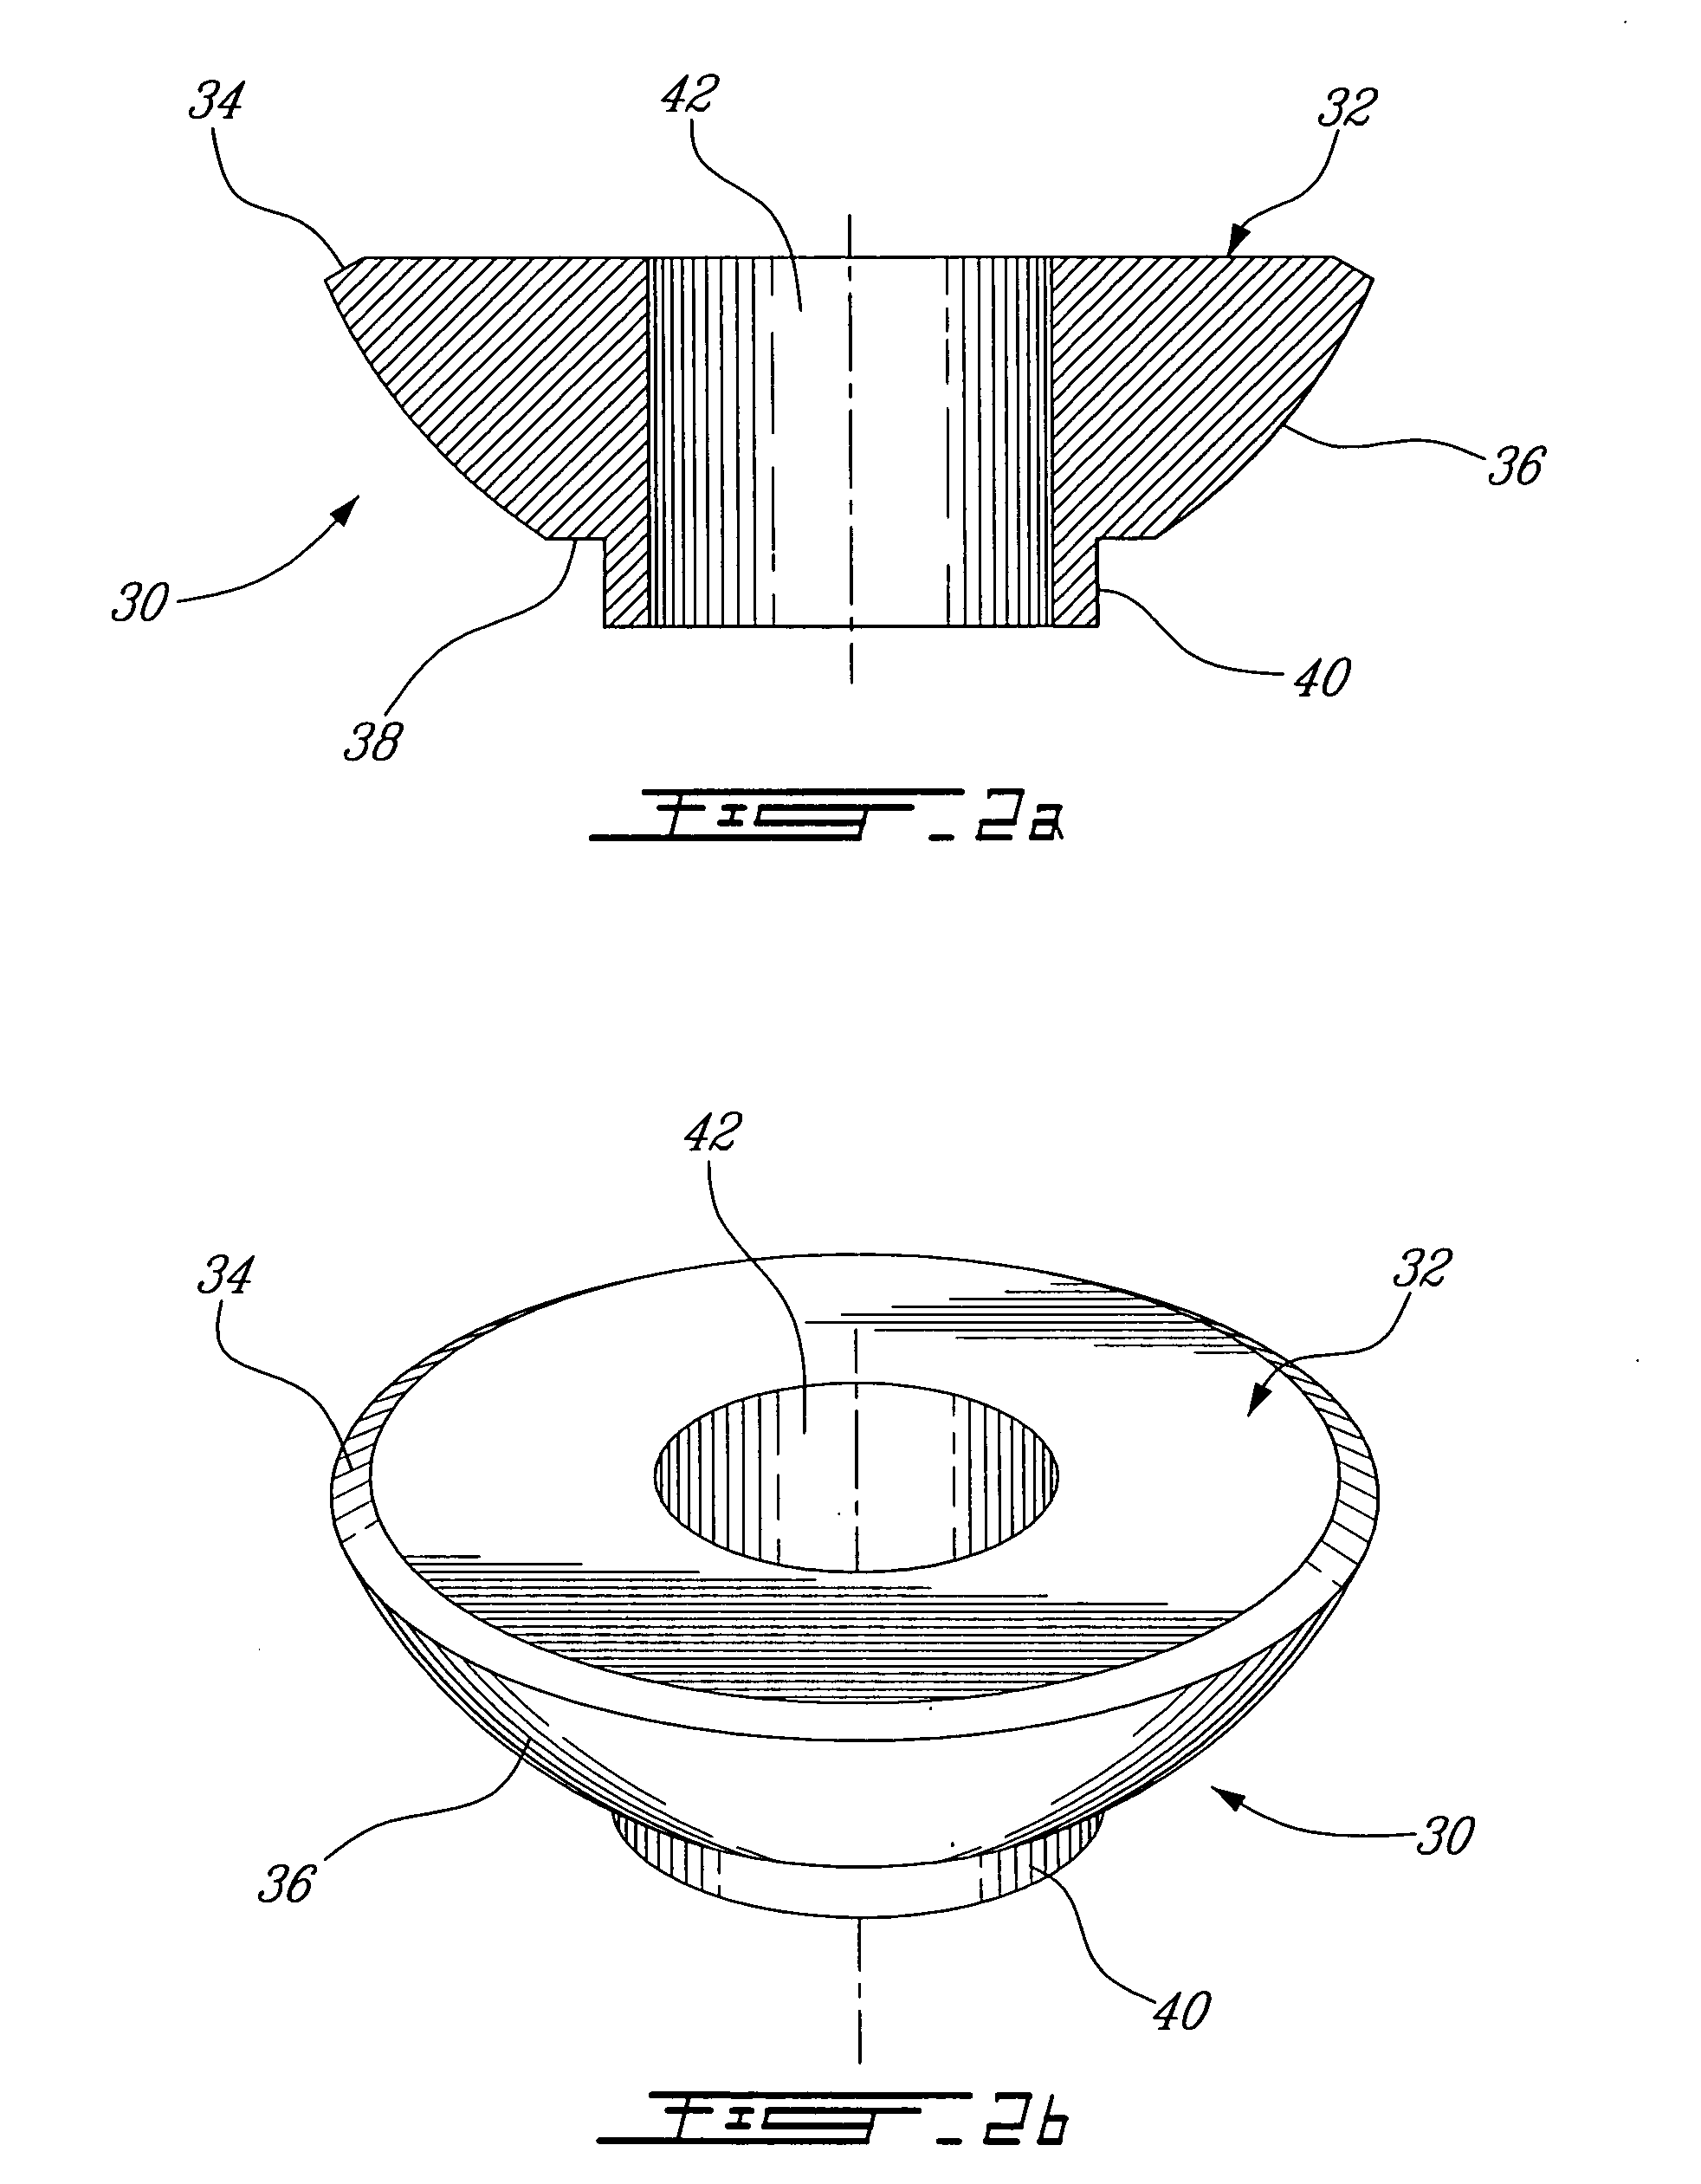 Implant system and method of installation thereof